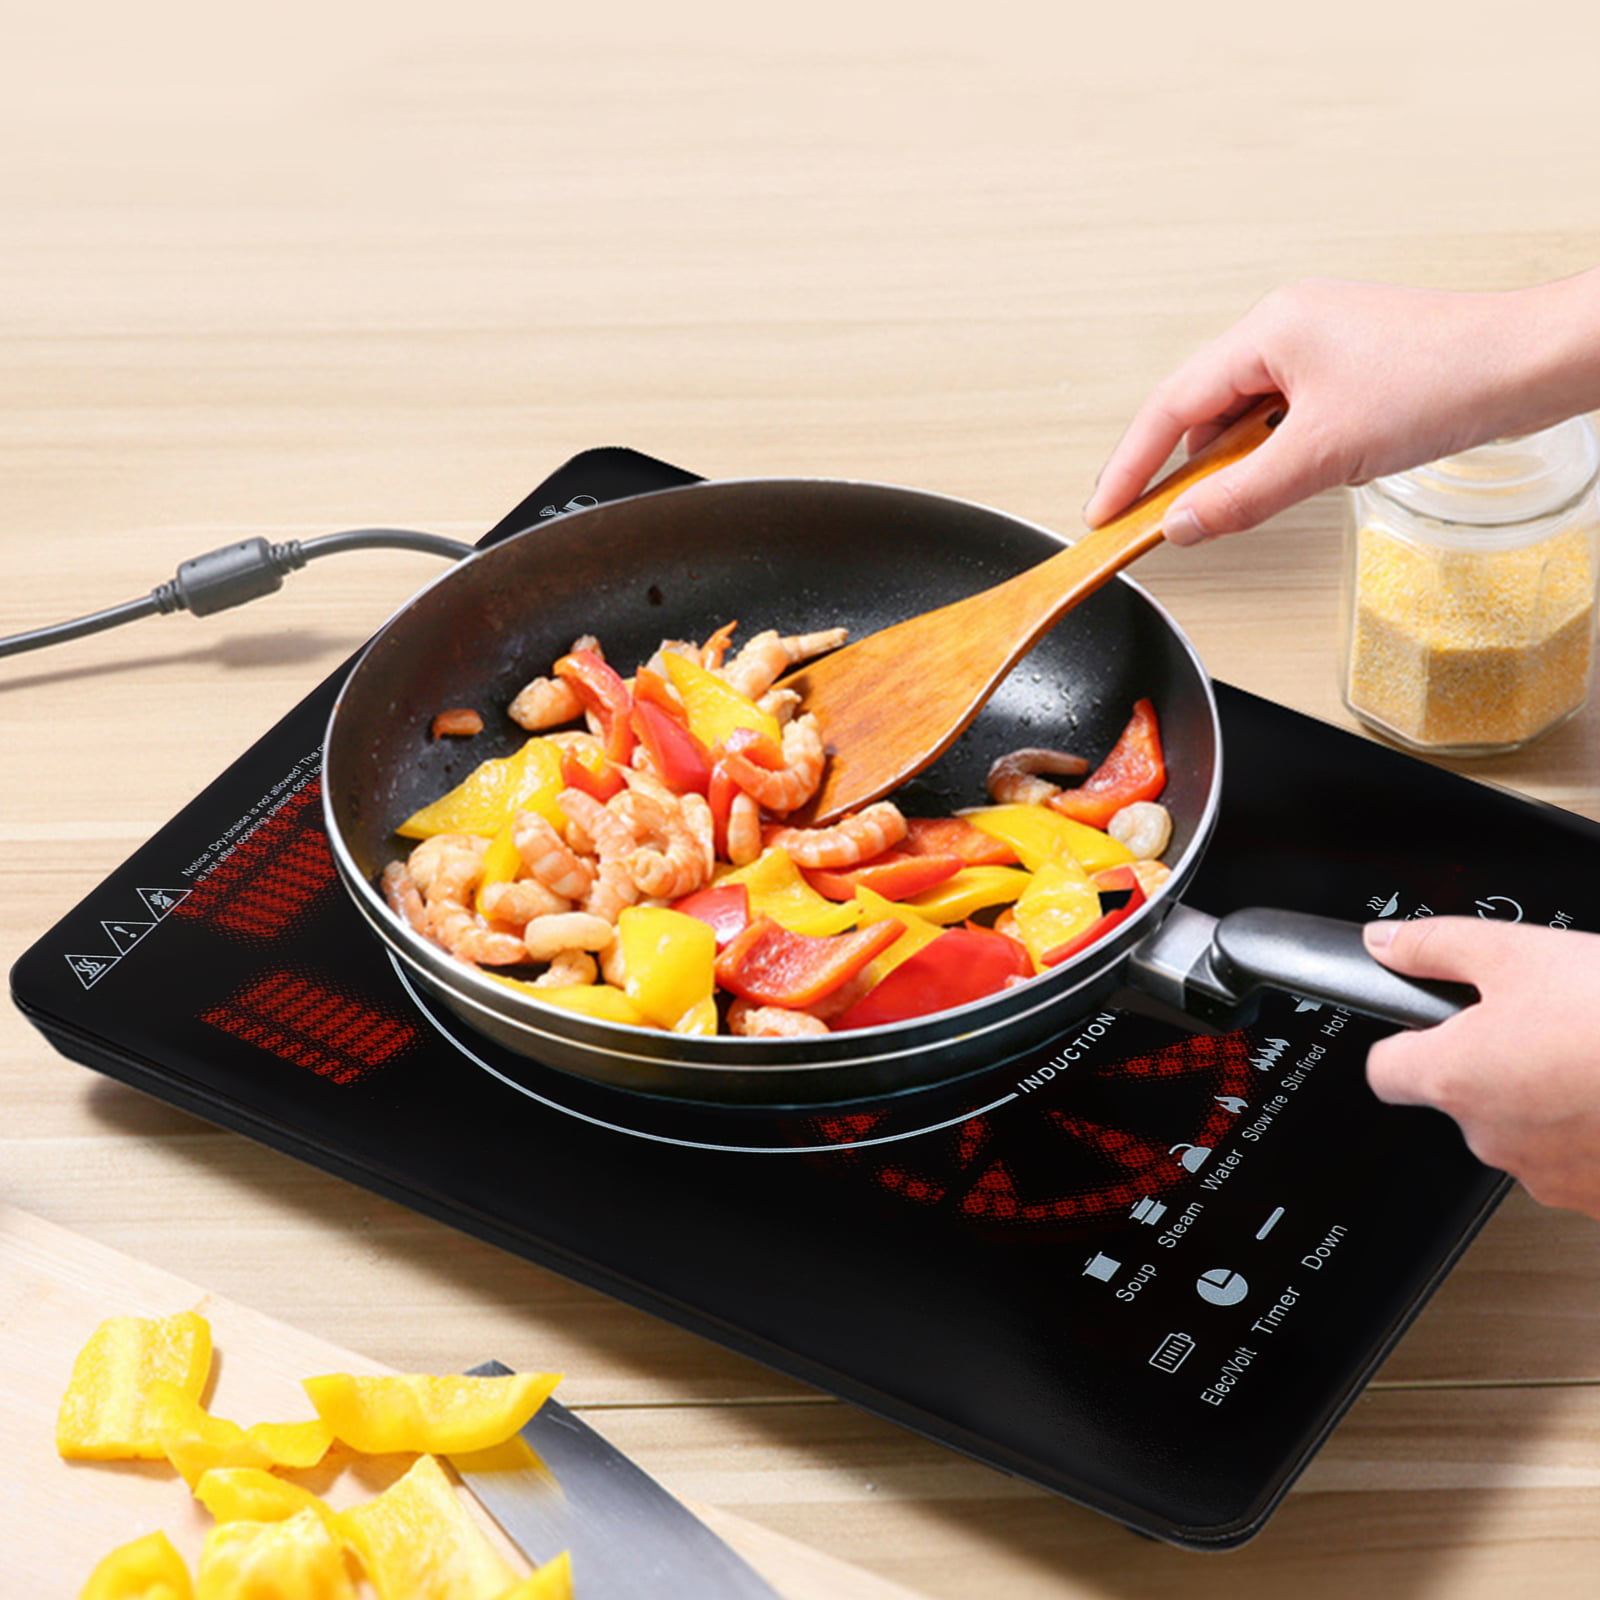 YYQTGG Induction Cooktop,Portable Single Tube Electric Stove, Hot Pot Electric Hot Pot Induction Hot Plate Kitchen Utensil 110V 1000W 21 x 21 x